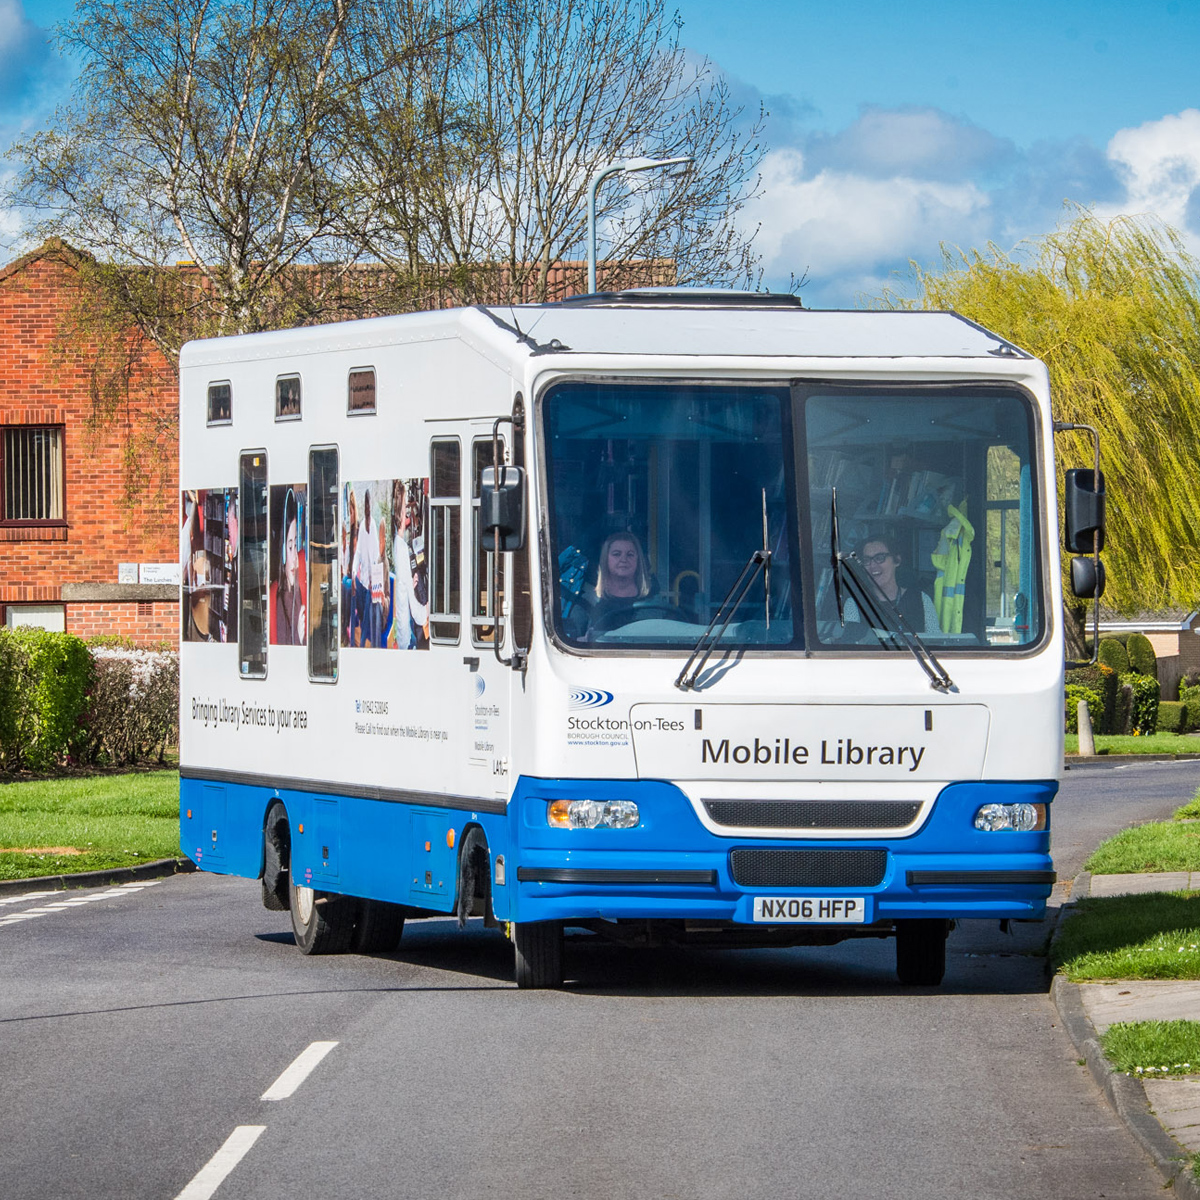 Have you checked out our Mobile Library routes? Visit our website for full details of stops, dates and times - stockton.gov.uk/mobile-library. We look forward to welcoming you all on board!